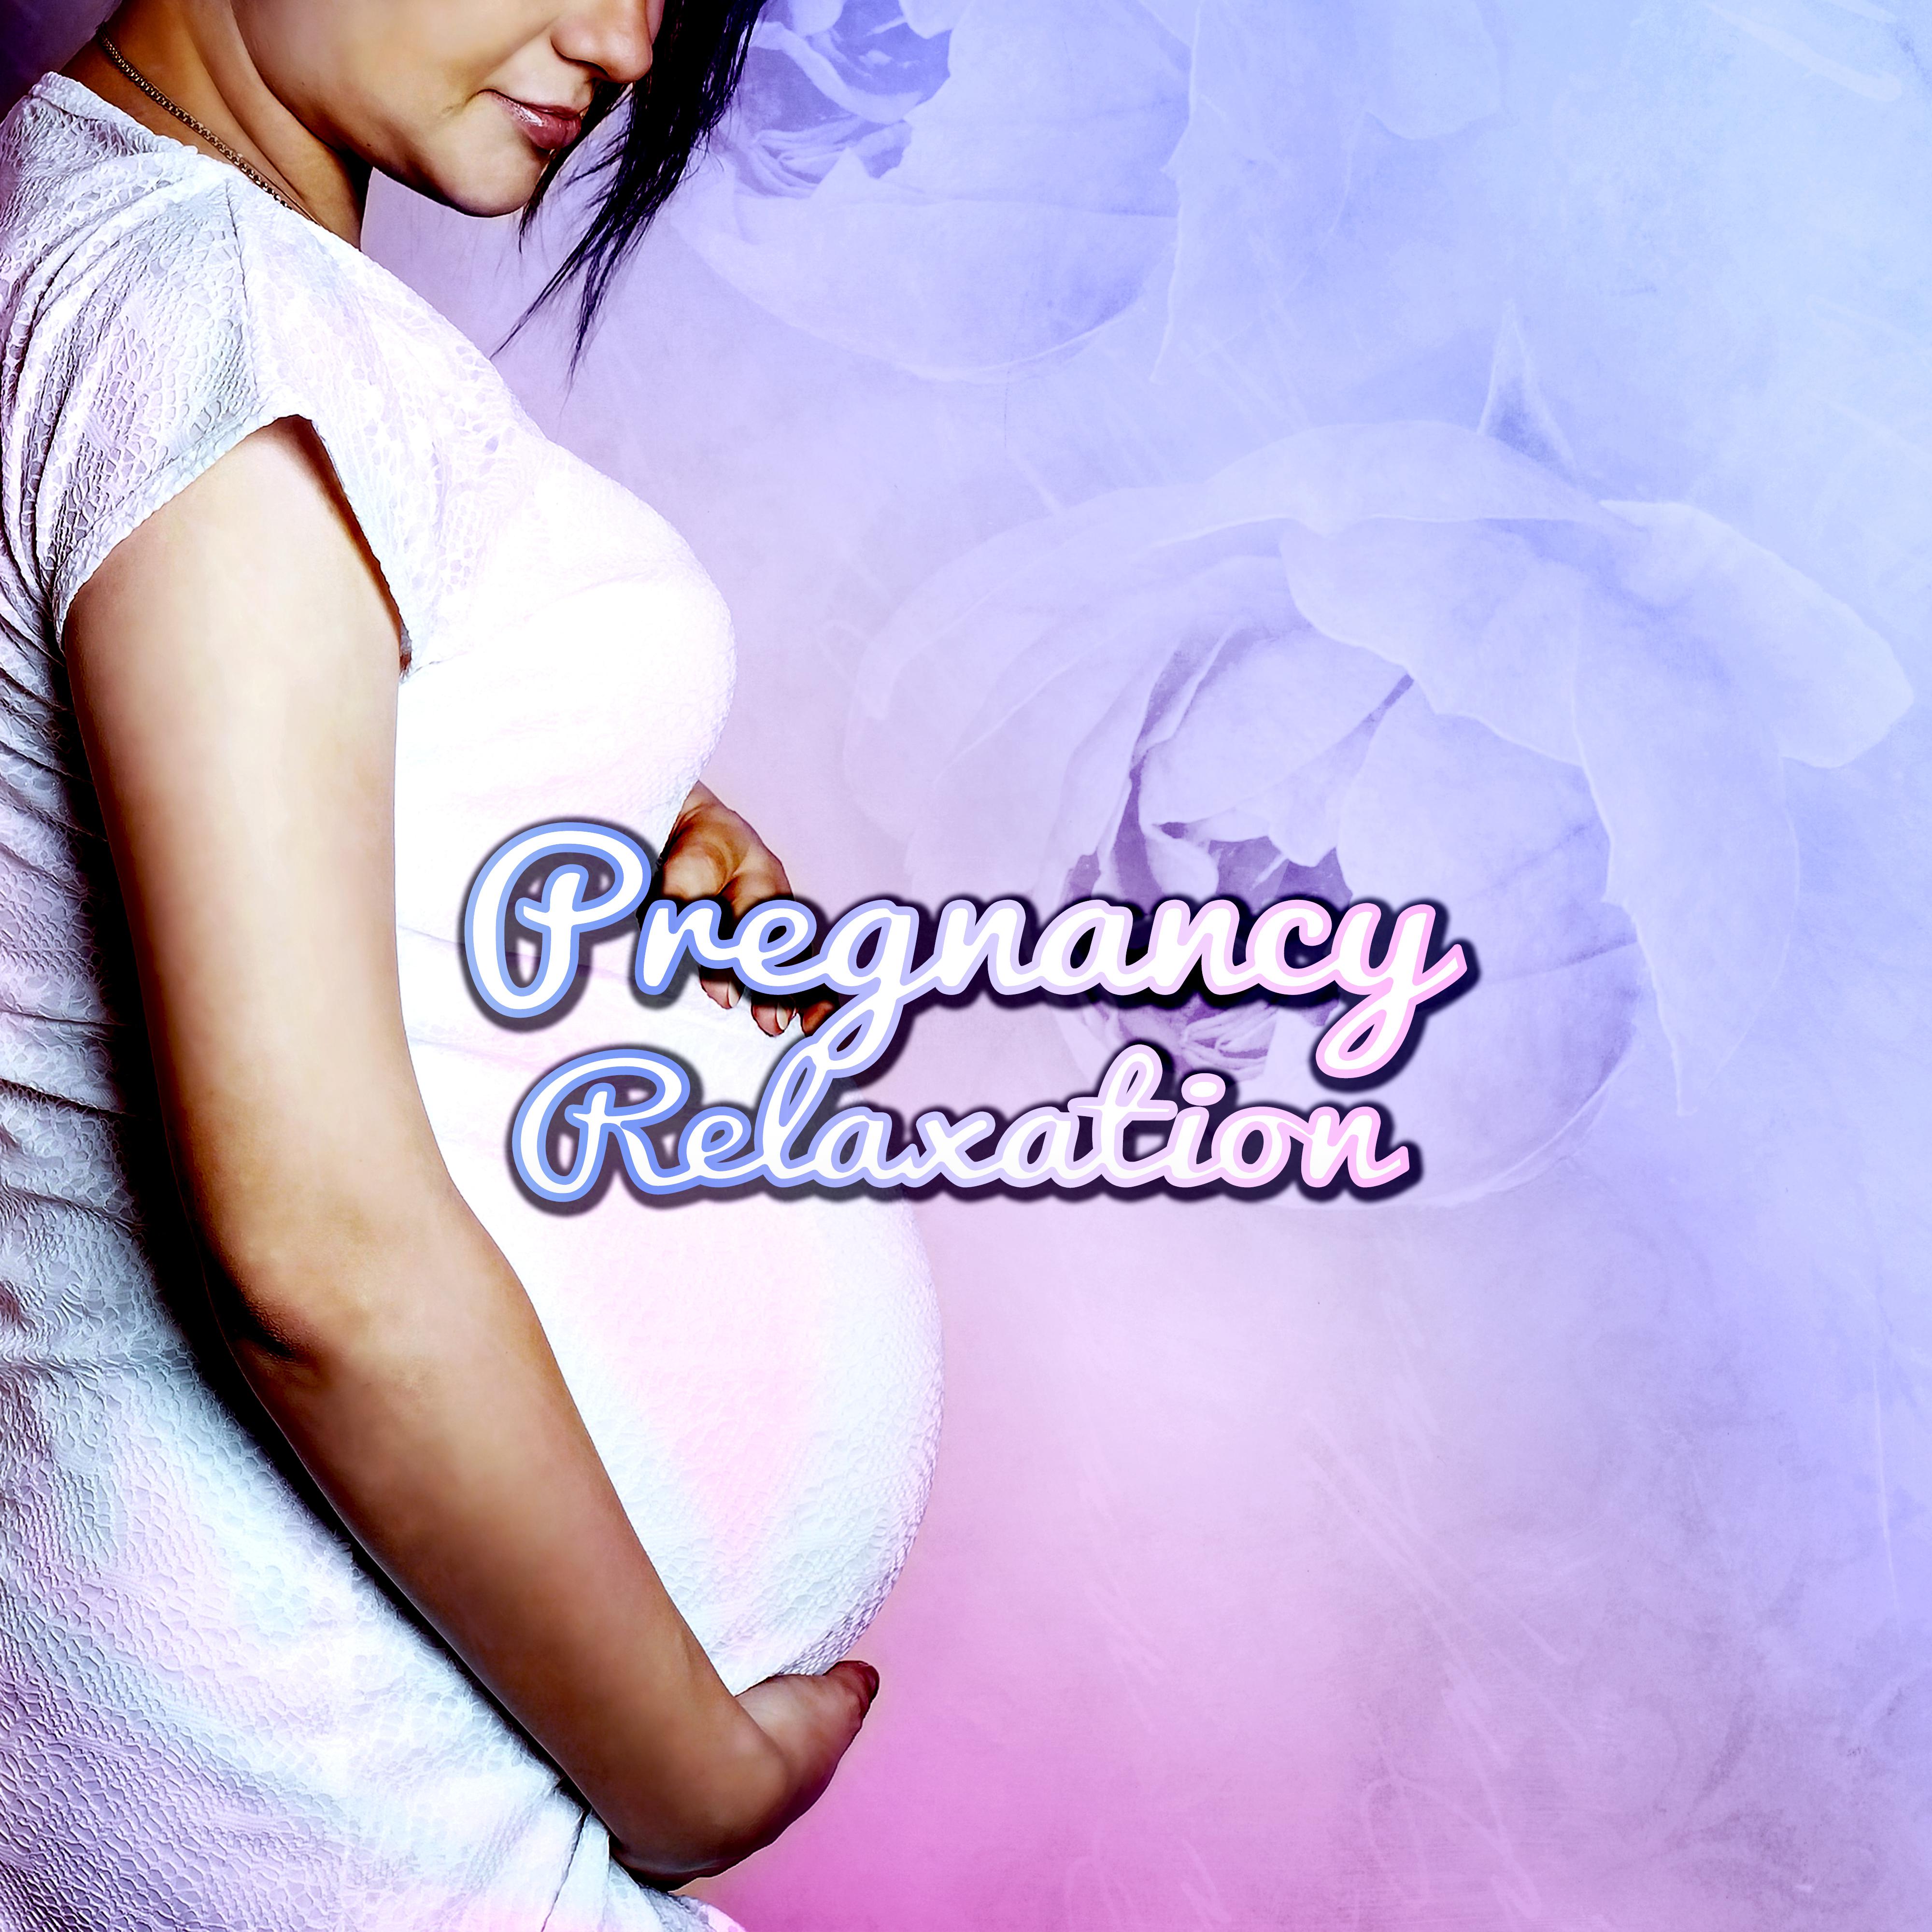 Pregnancy Relaxation  Nature Sounds for Pregnant to Relax, Prenatal Yoga, Asian Zen Spa, Music for Massage, Calm Your Baby